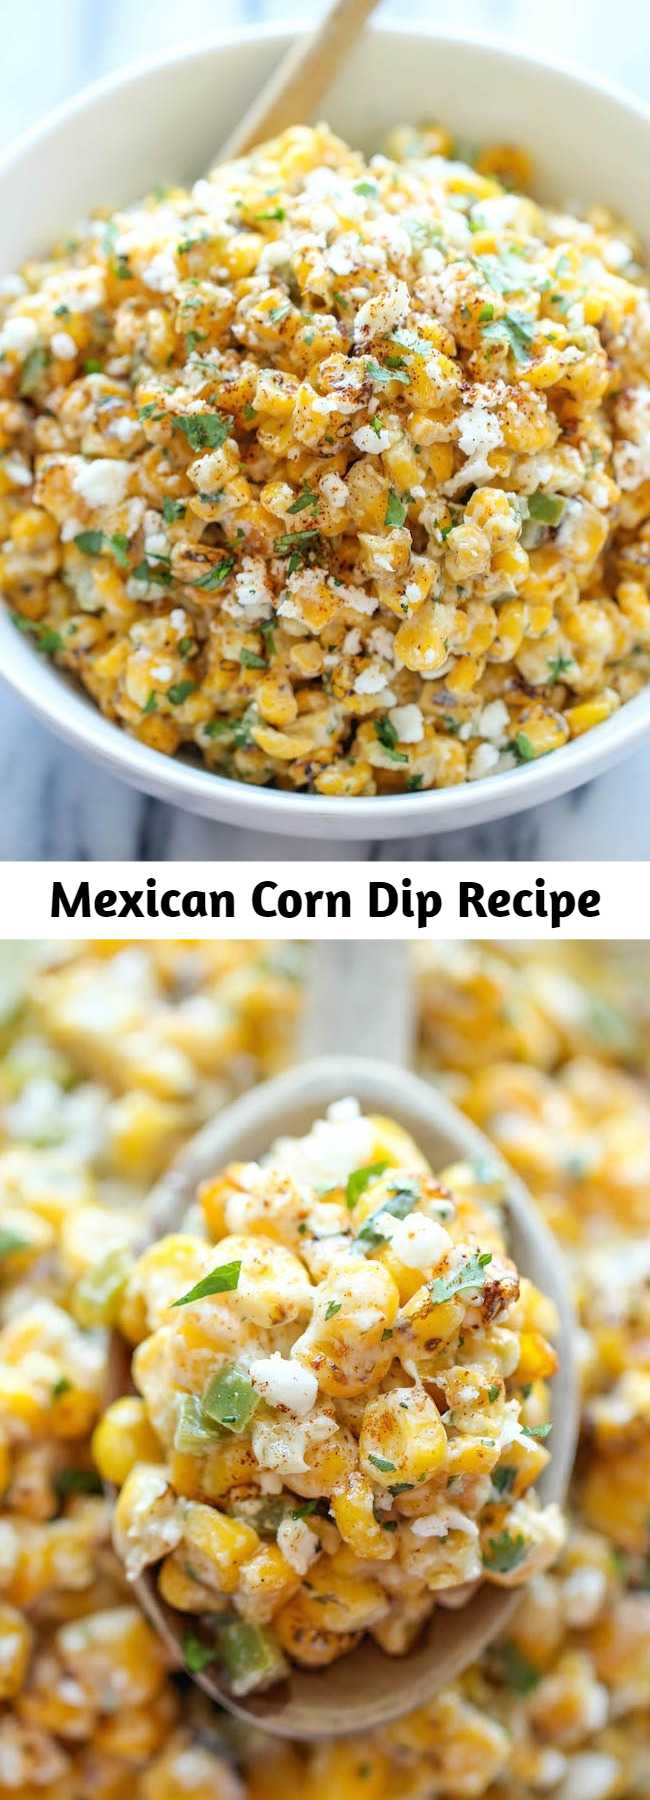 Mexican Corn Dip Recipe - The traditional Mexican street corn is turned into the best dip ever. It’s so good, you won’t even need the chips. Just grab a spoon and eat!